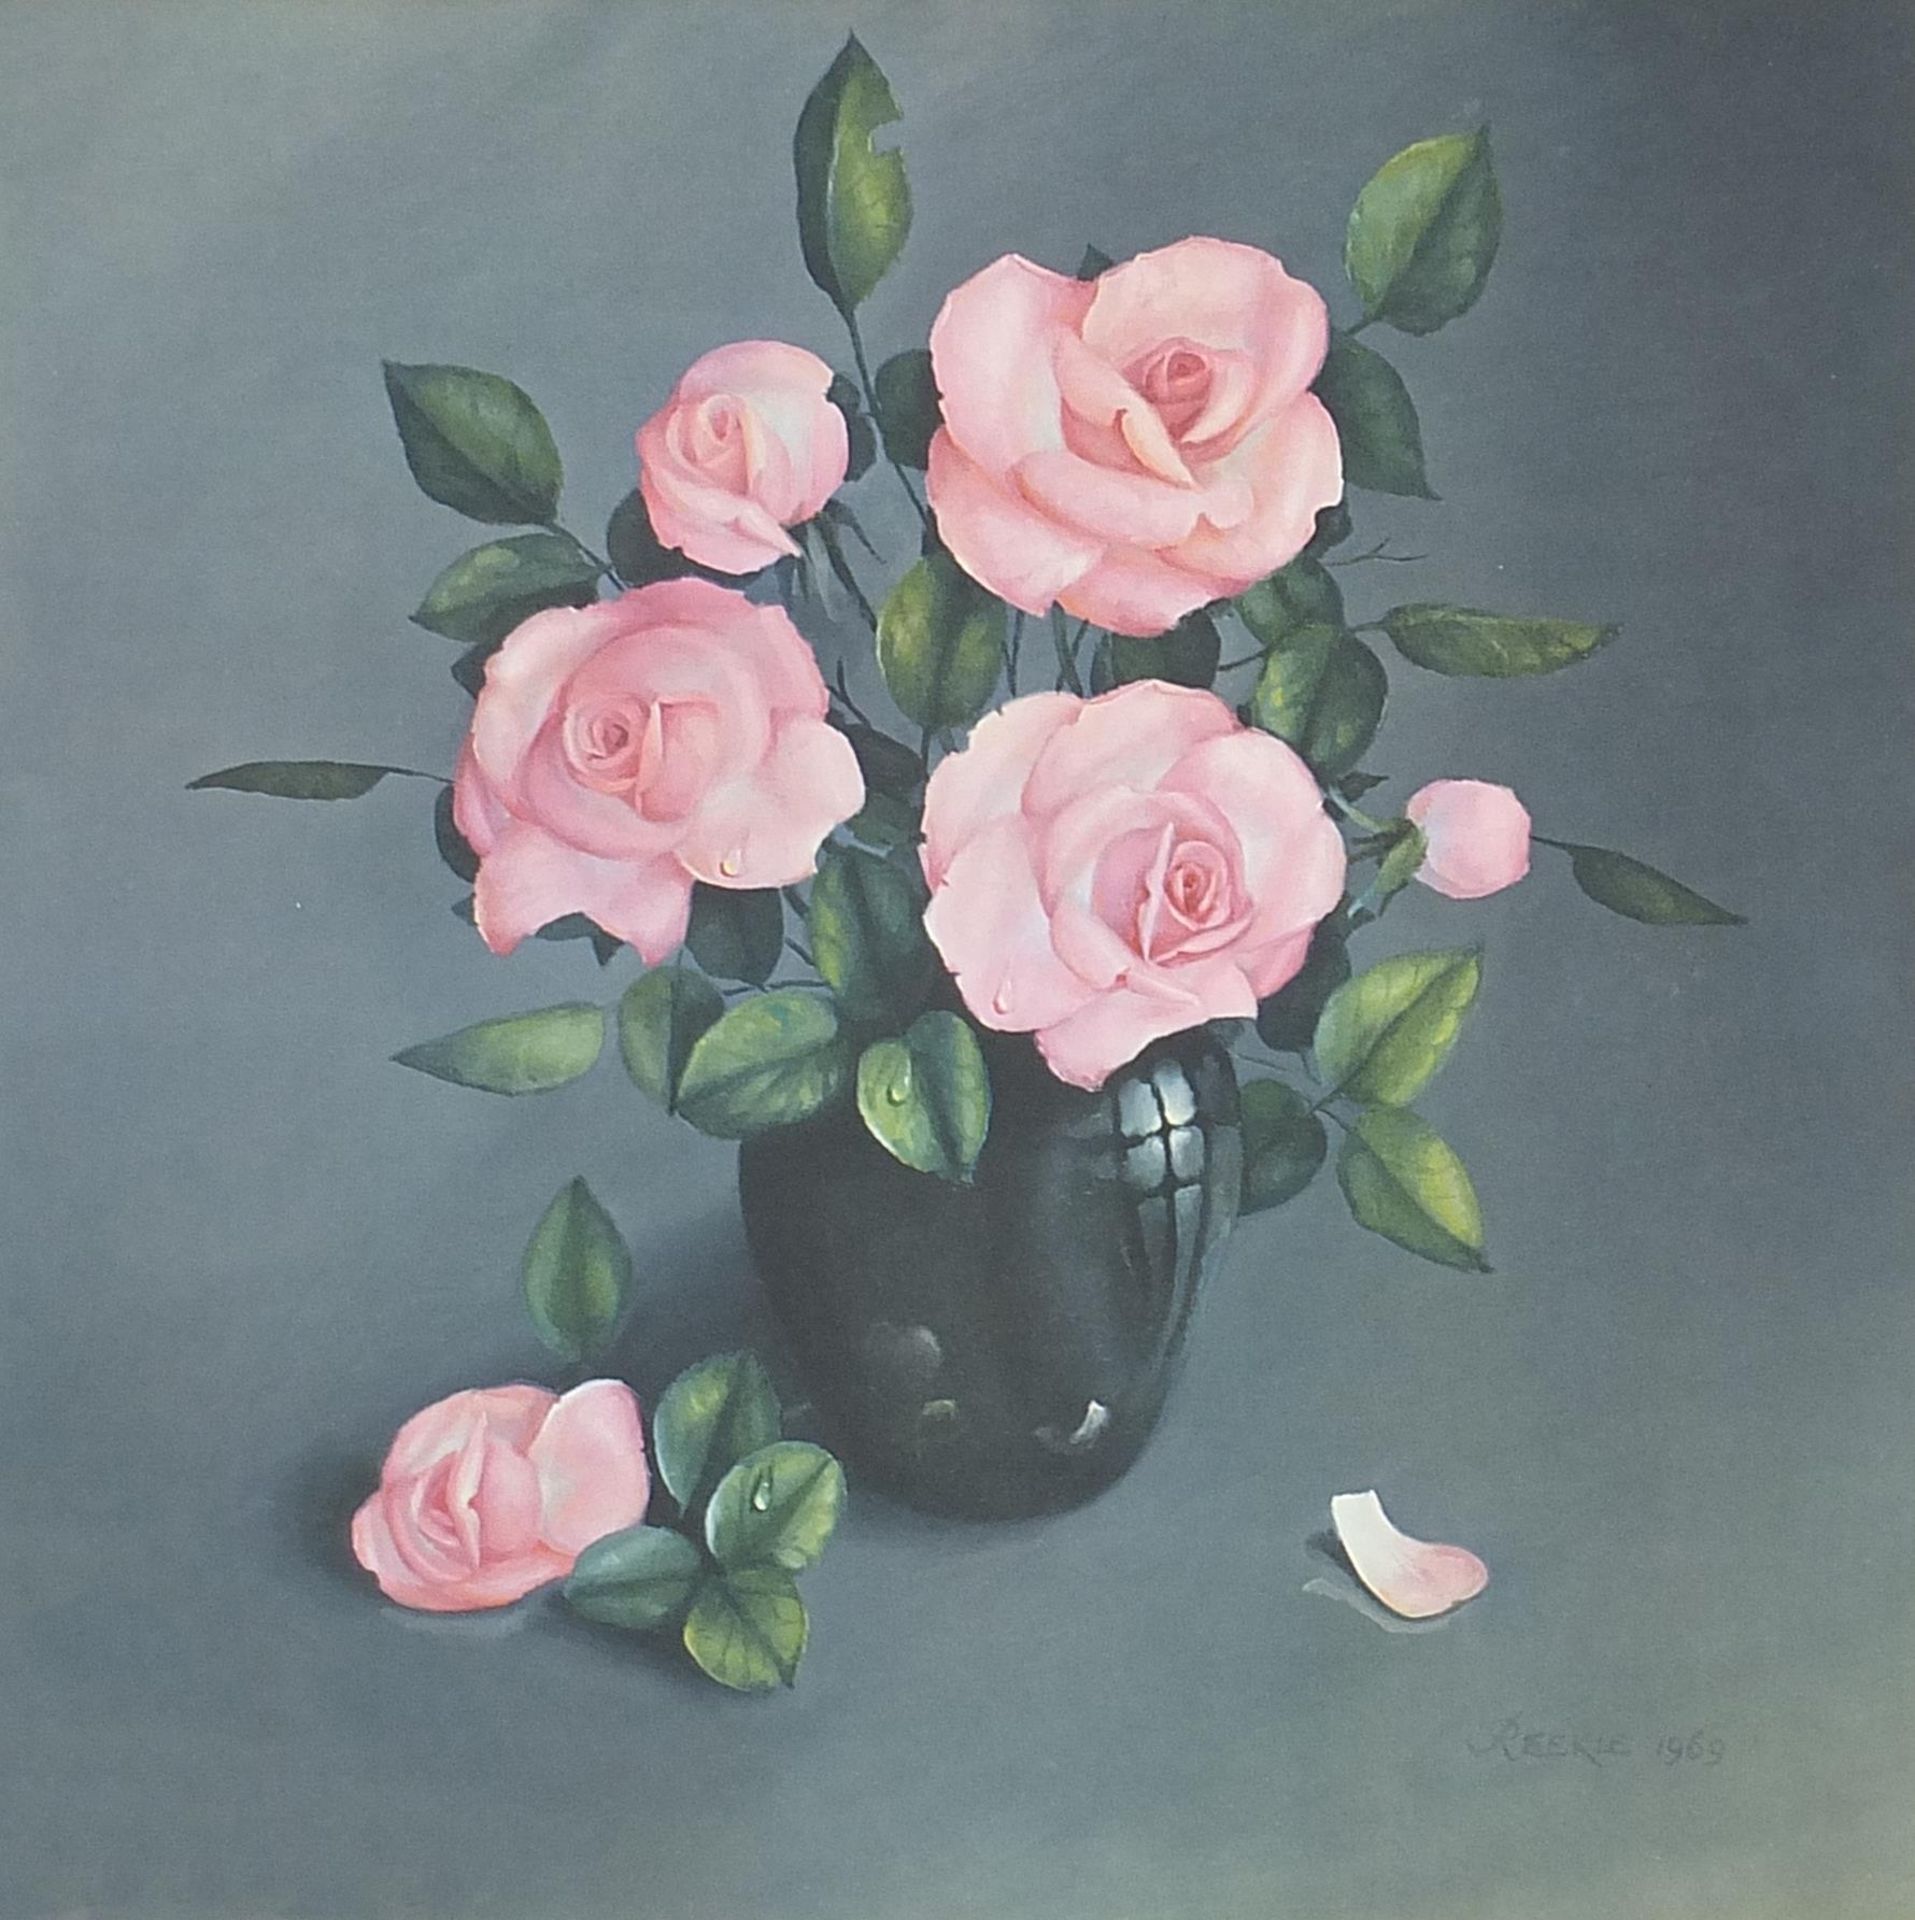 Pink Roses, floral print, mounted and framed, 48cm x 48cm excluding the mount and frame